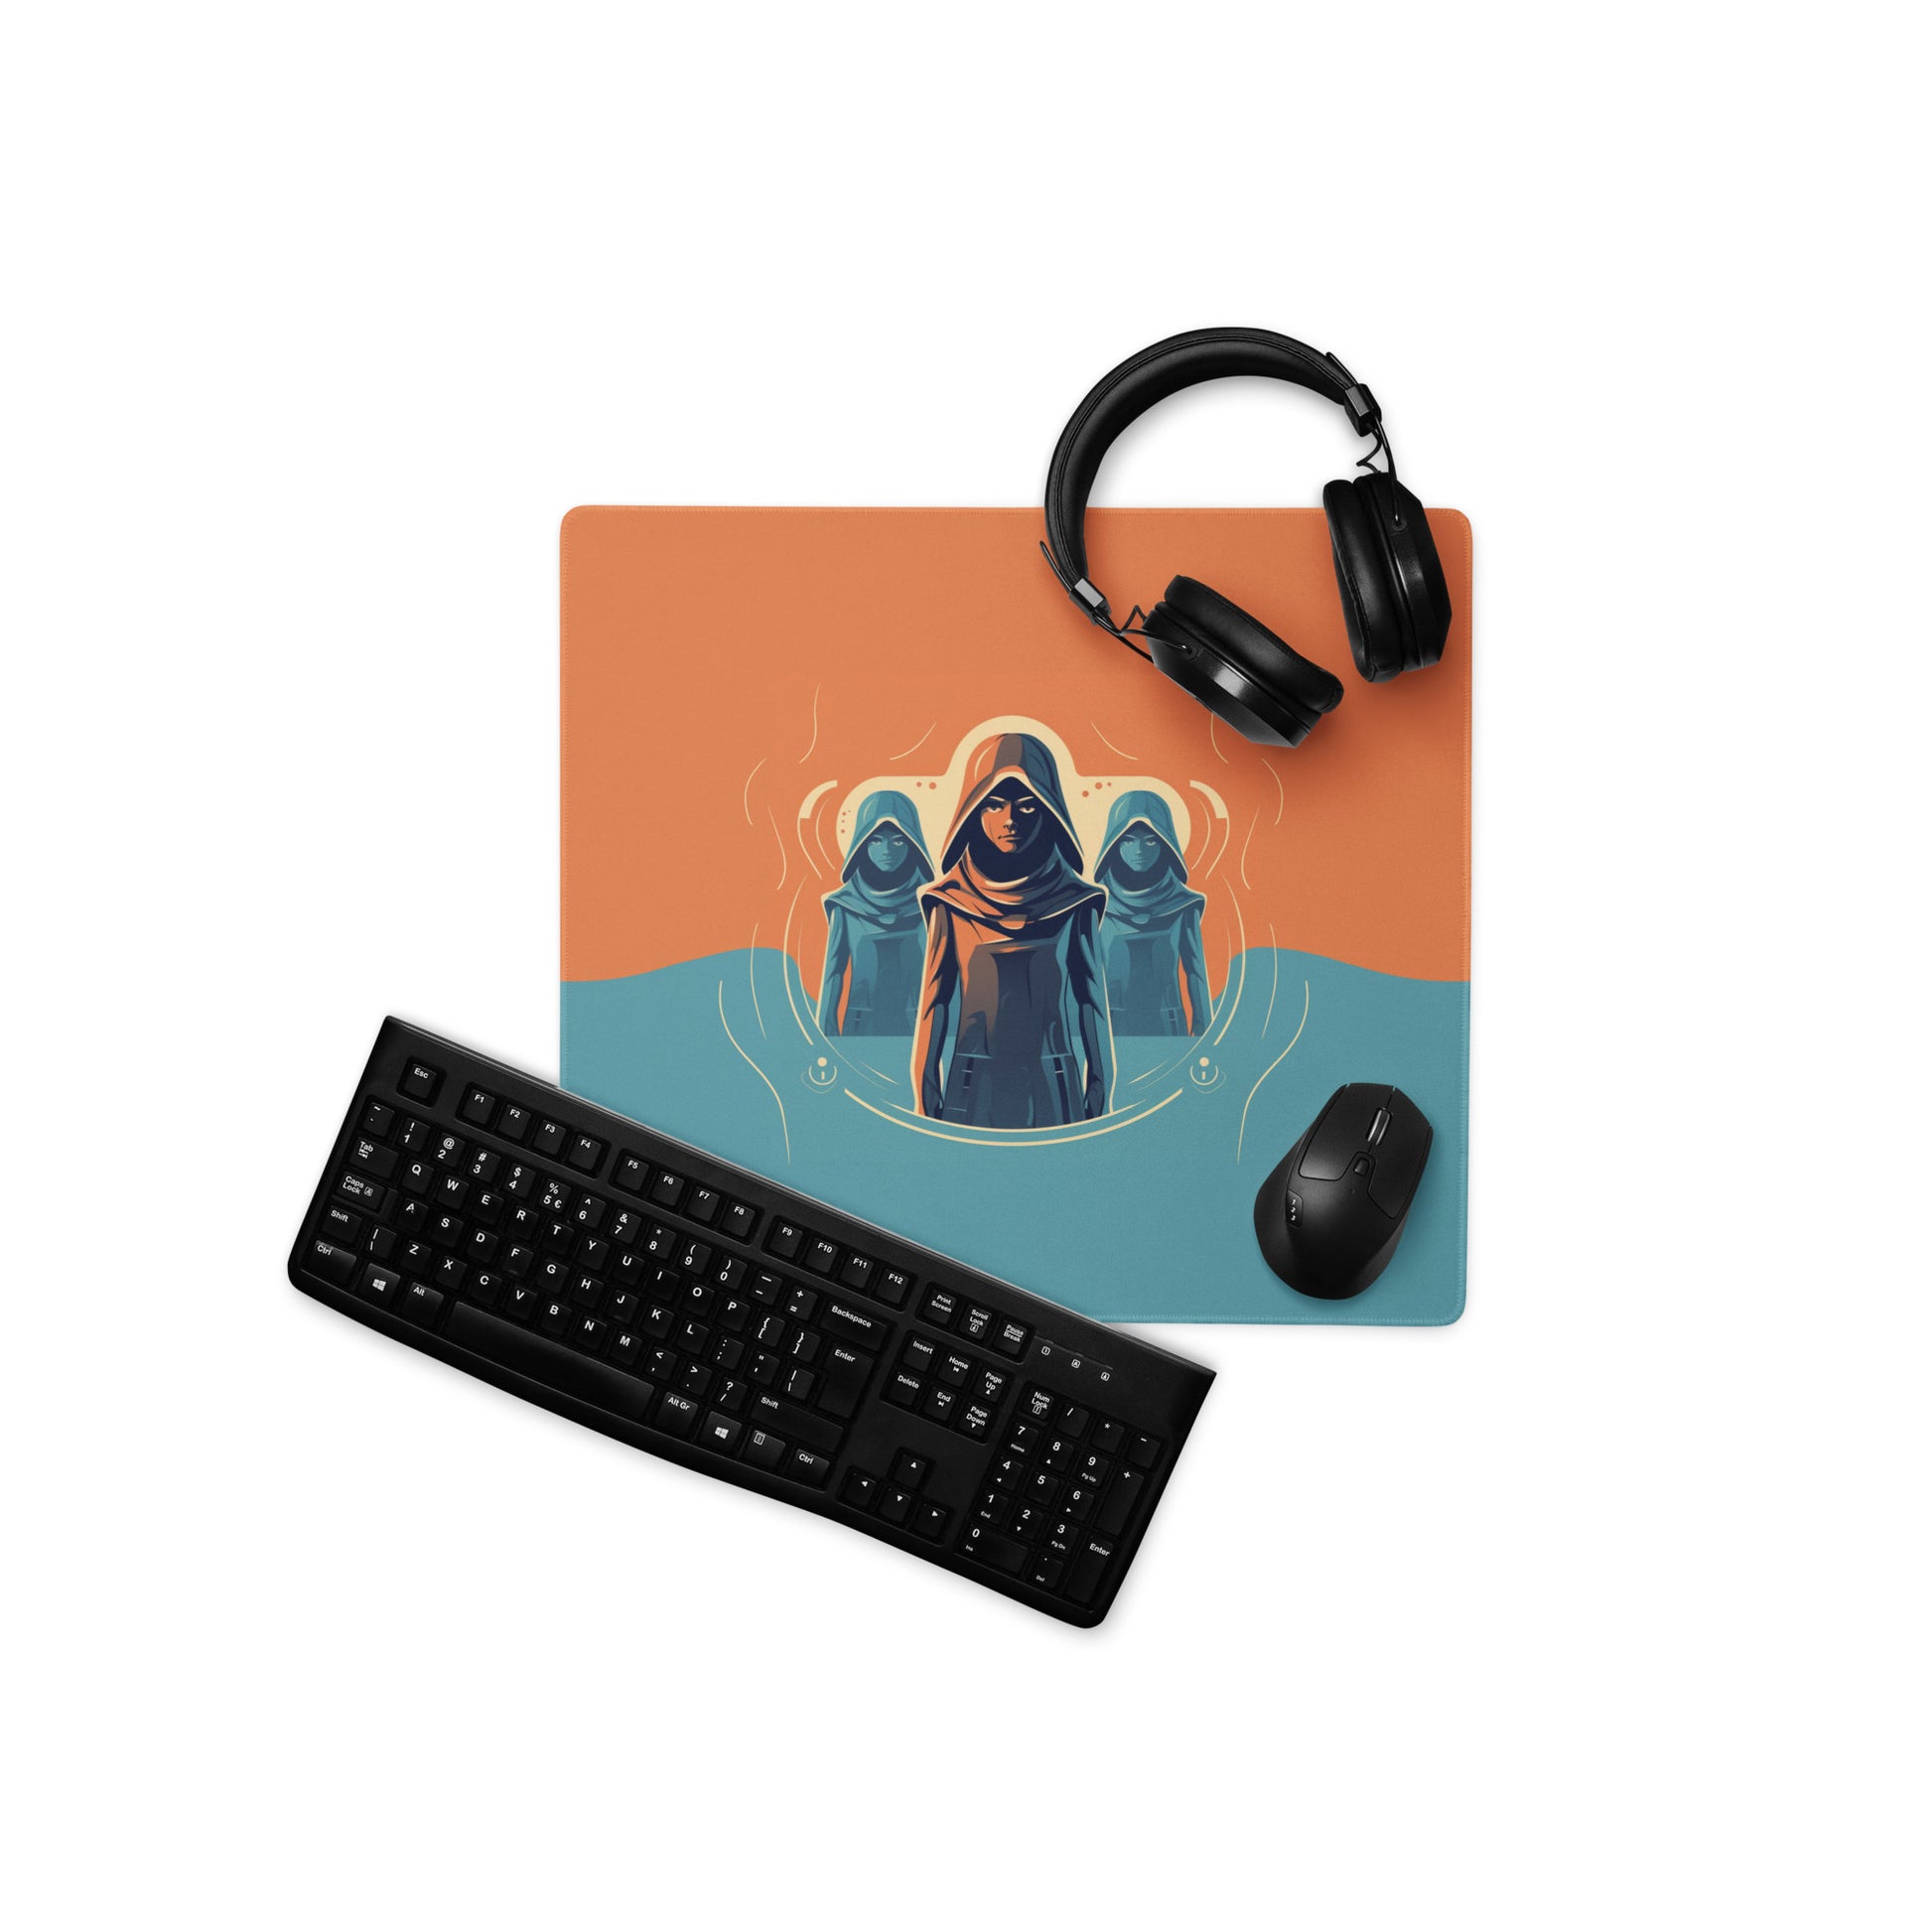 A 18" x 16" orange and blue desk pad with three robed figures. With a keyboard, mouse, and headphones sitting on it.